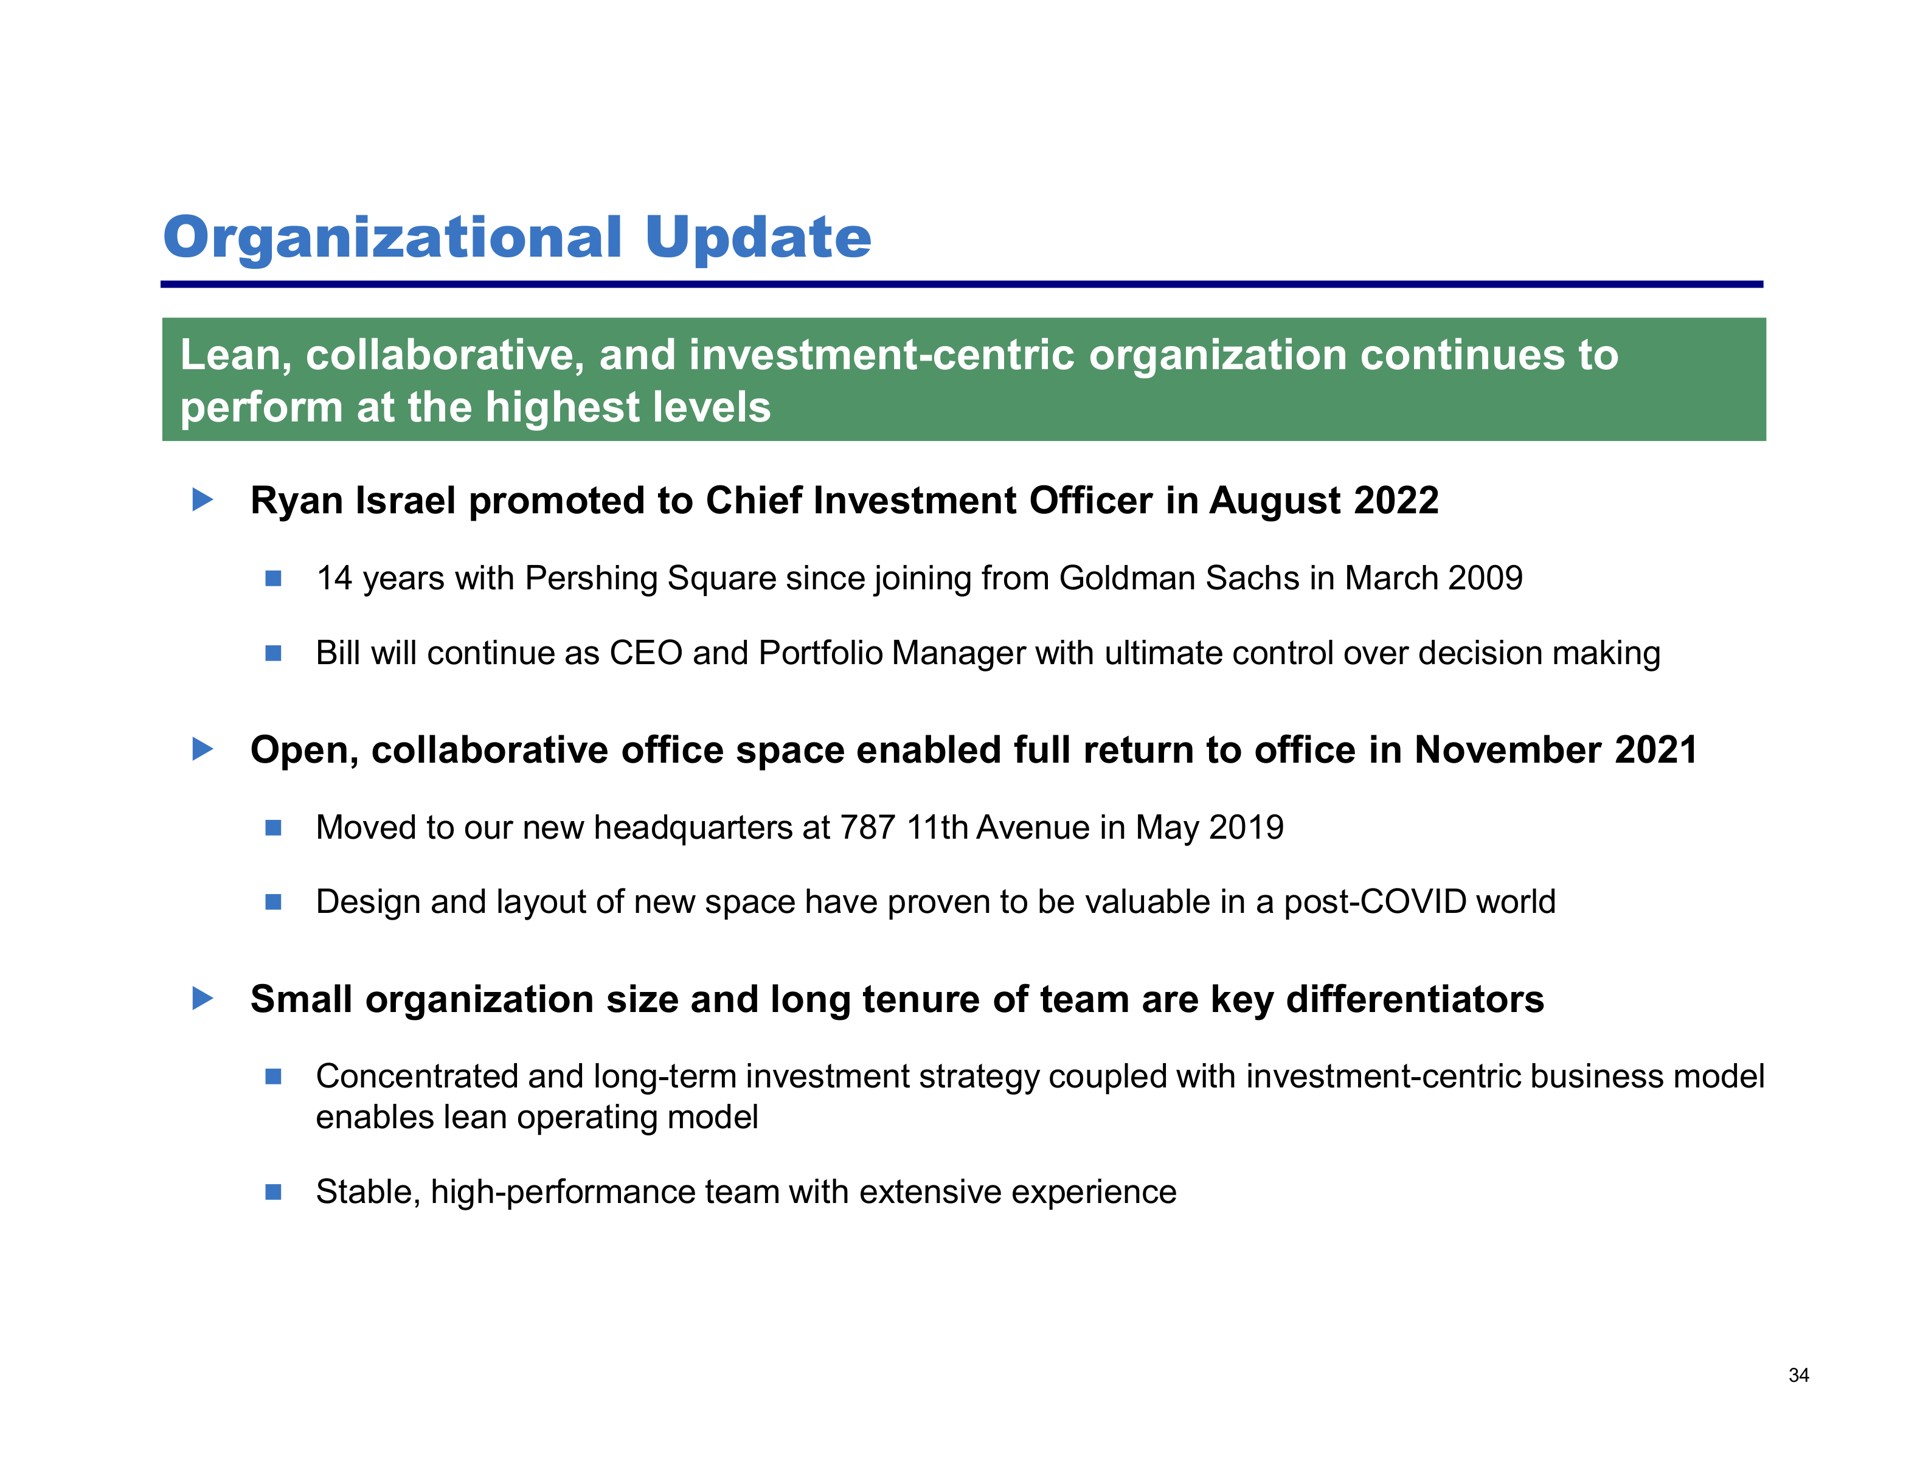 organizational update lean collaborative and investment centric organization continues to perform at the highest levels promoted to chief investment officer in august open collaborative office space enabled full return to office in small organization size and long tenure of team are key differentiators | Pershing Square